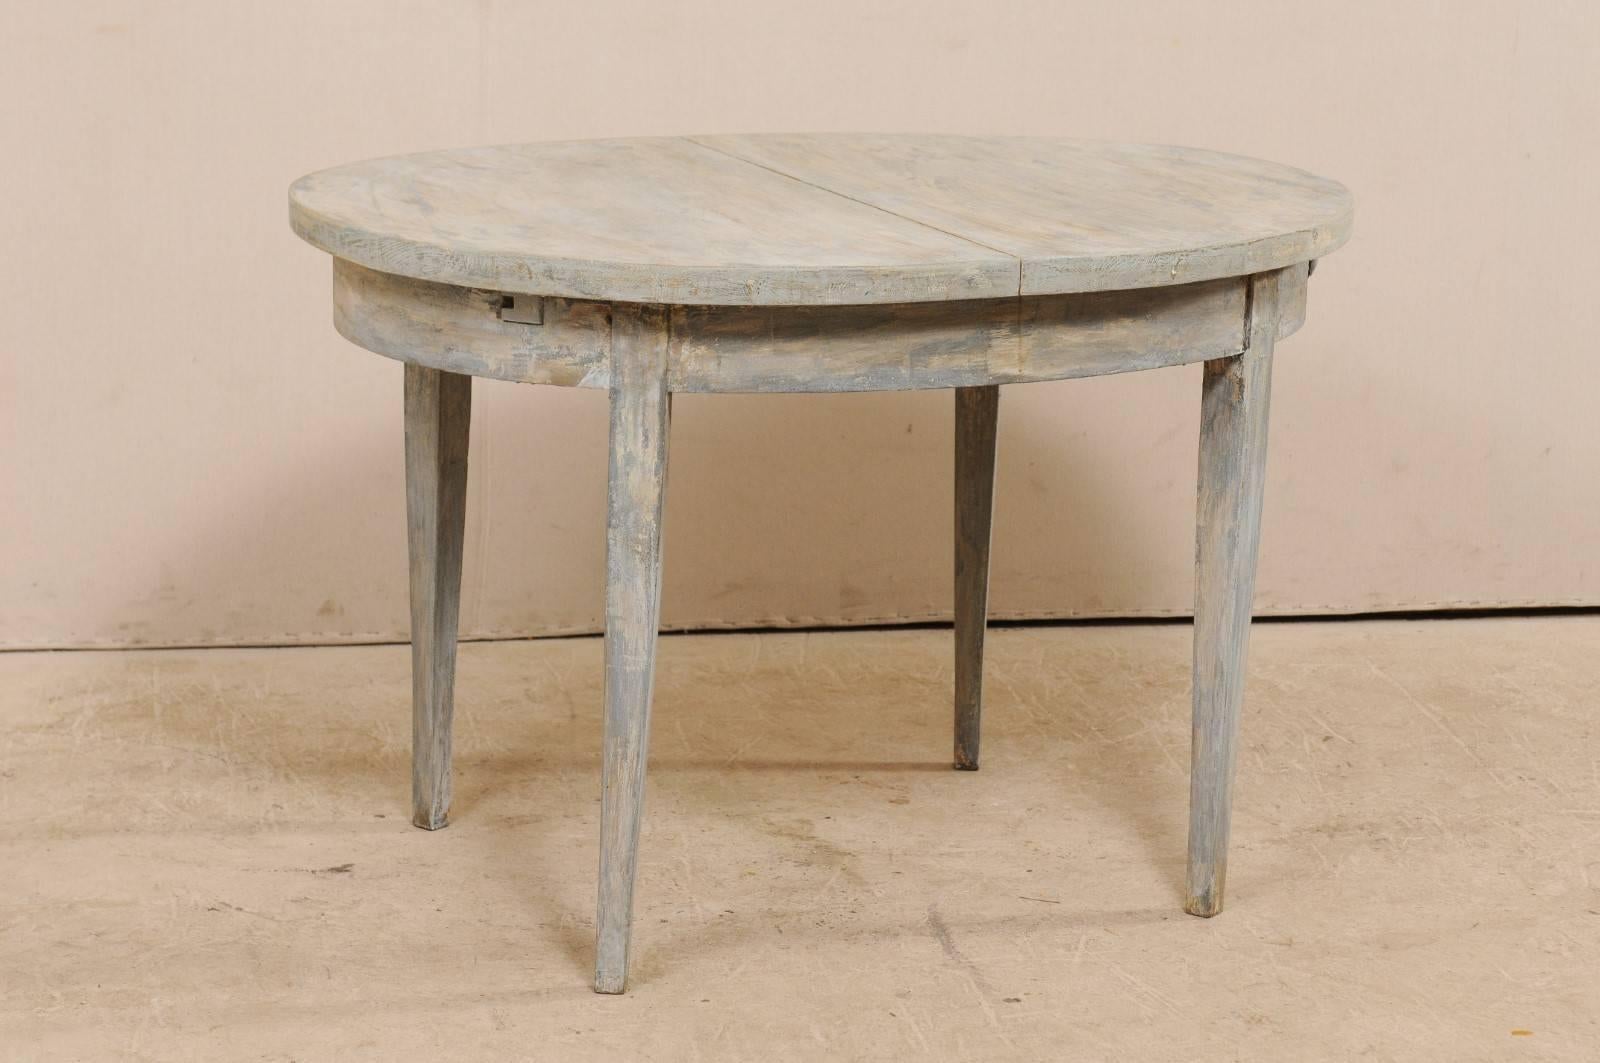 Swedish Midcentury Painted Wood Oval Occasional Table in Soft Blue-Grey 2